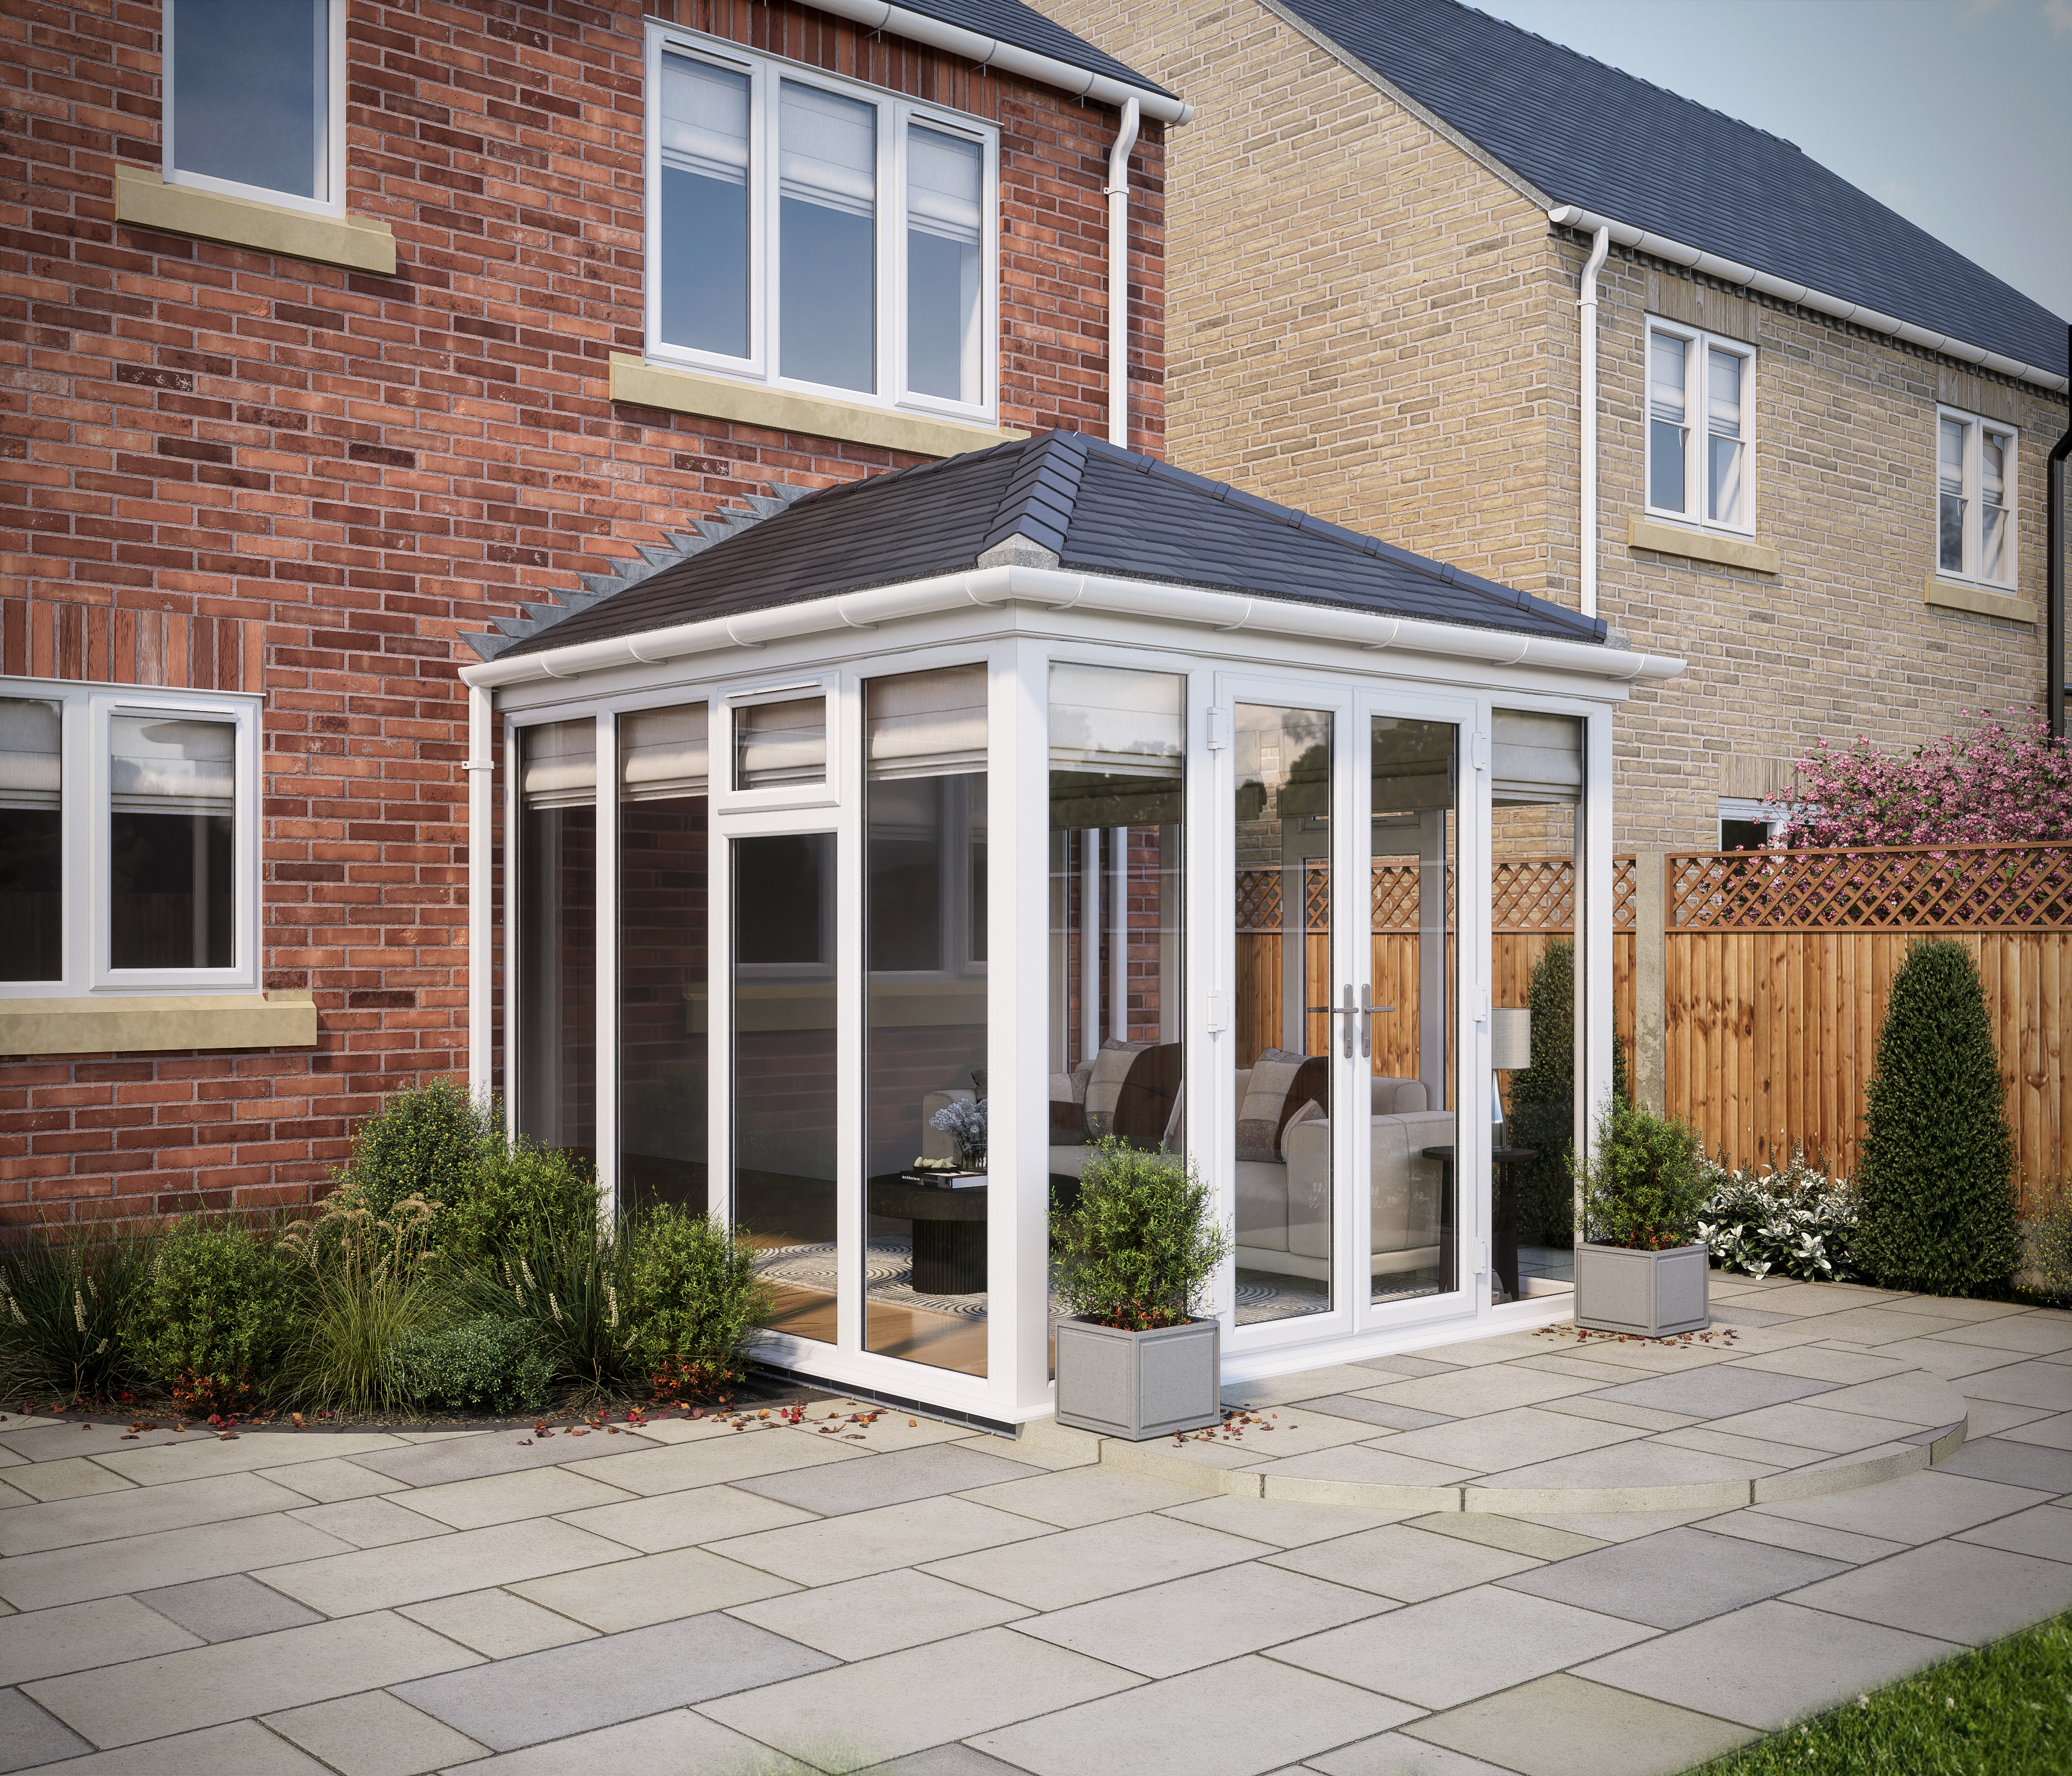 SOLid Roof Full Height Edwardian Conservatory White Frames with Titanium Grey Tiles - 13 x 10ft